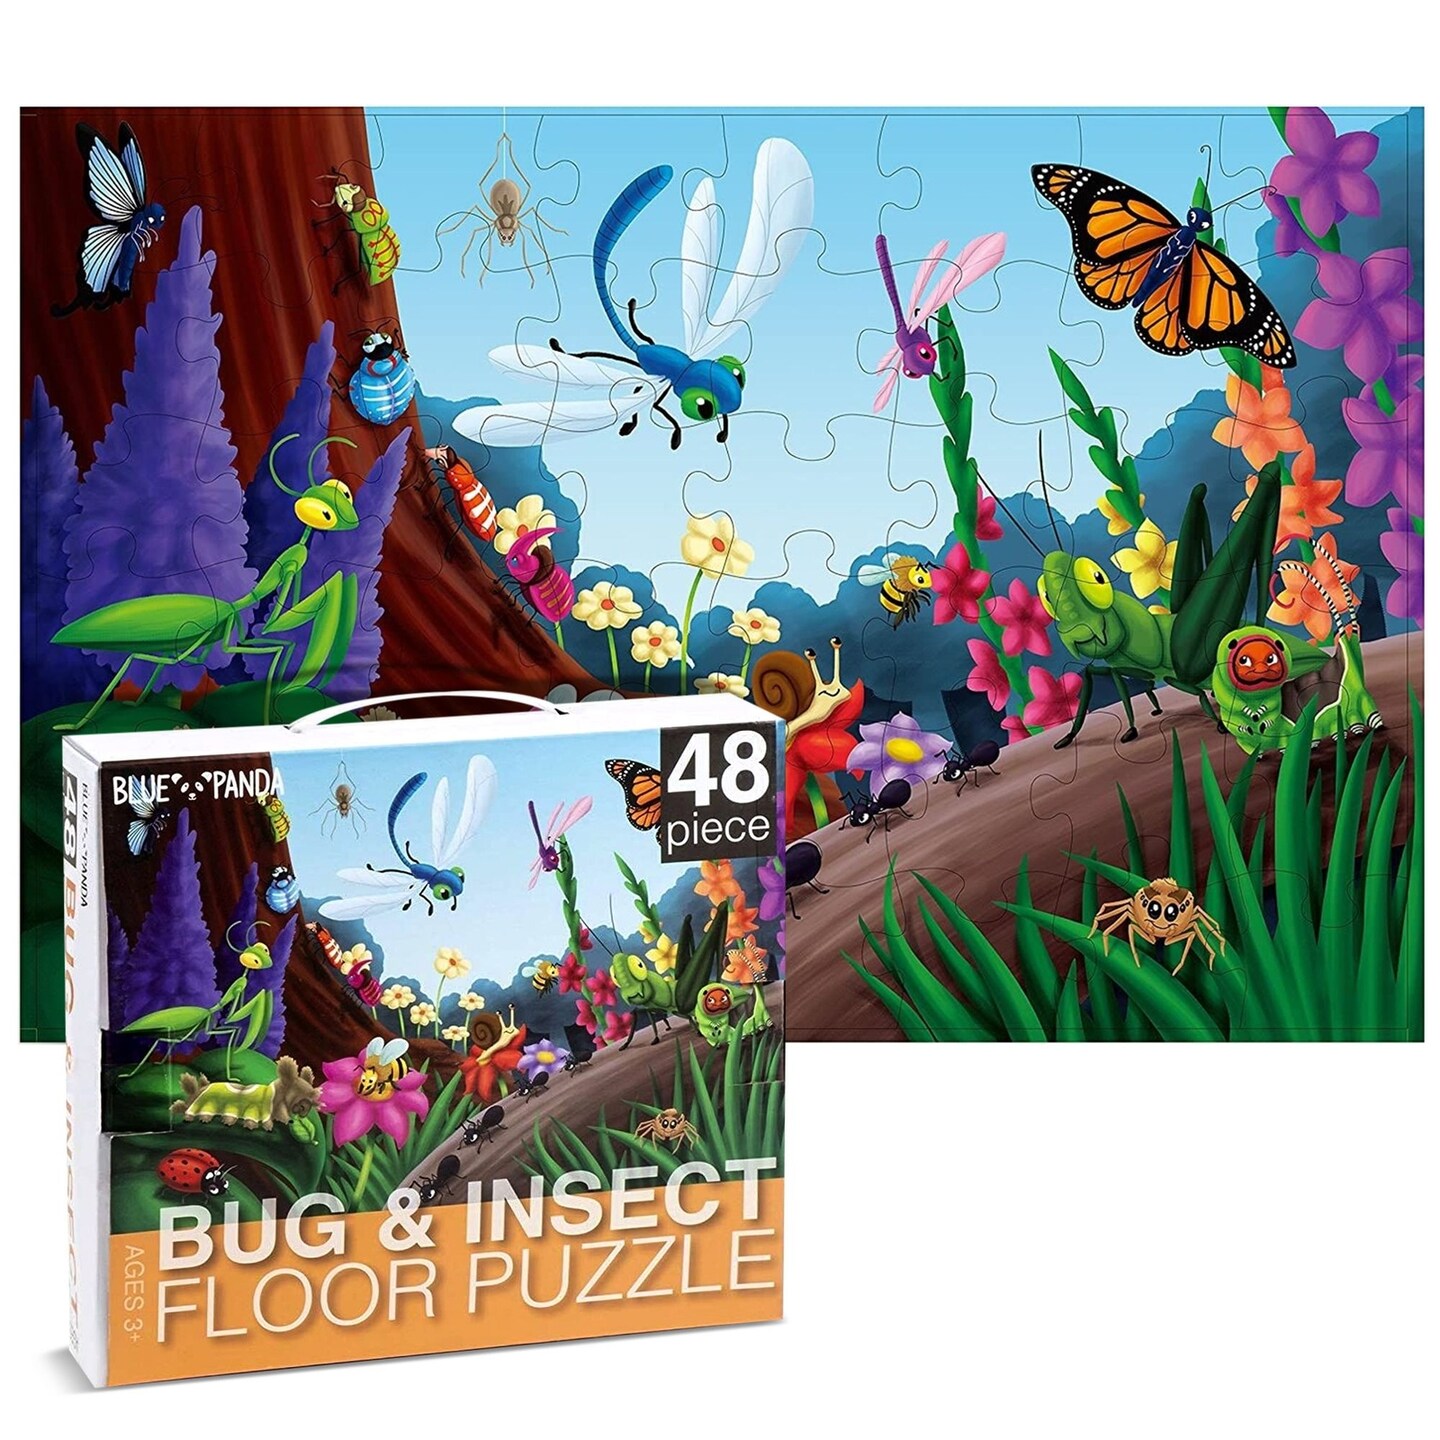 48 Piece Giant Bugs and Insects Jigsaw Puzzle for Kids Ages 3-5 and 4-8, Jumbo Floor Puzzle for Toddler Preschool Learning (2 x 3 Feet)